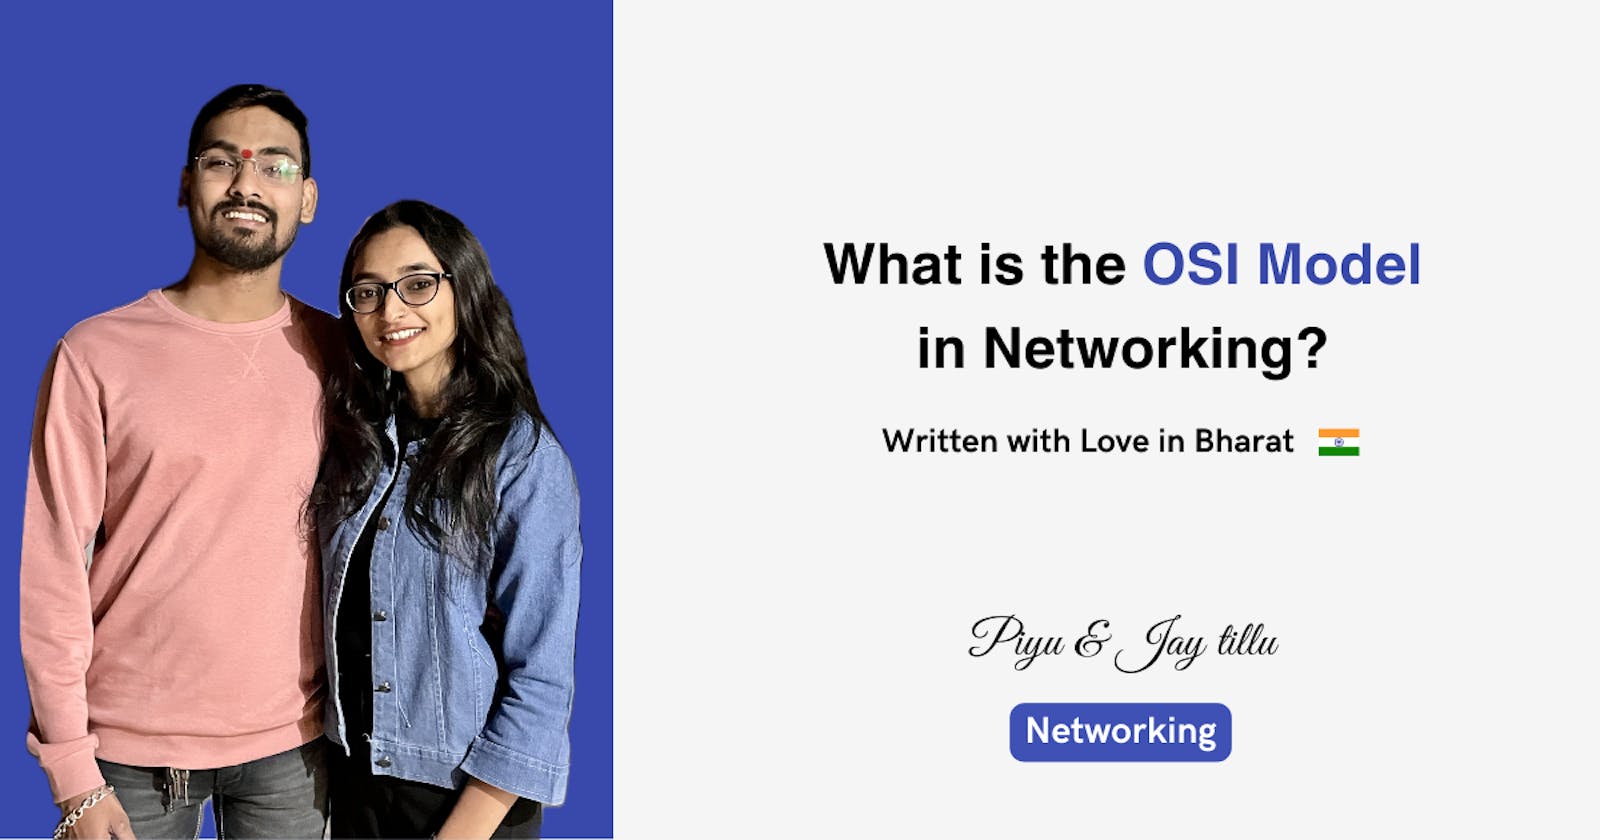 What is the OSI Model in Networking?